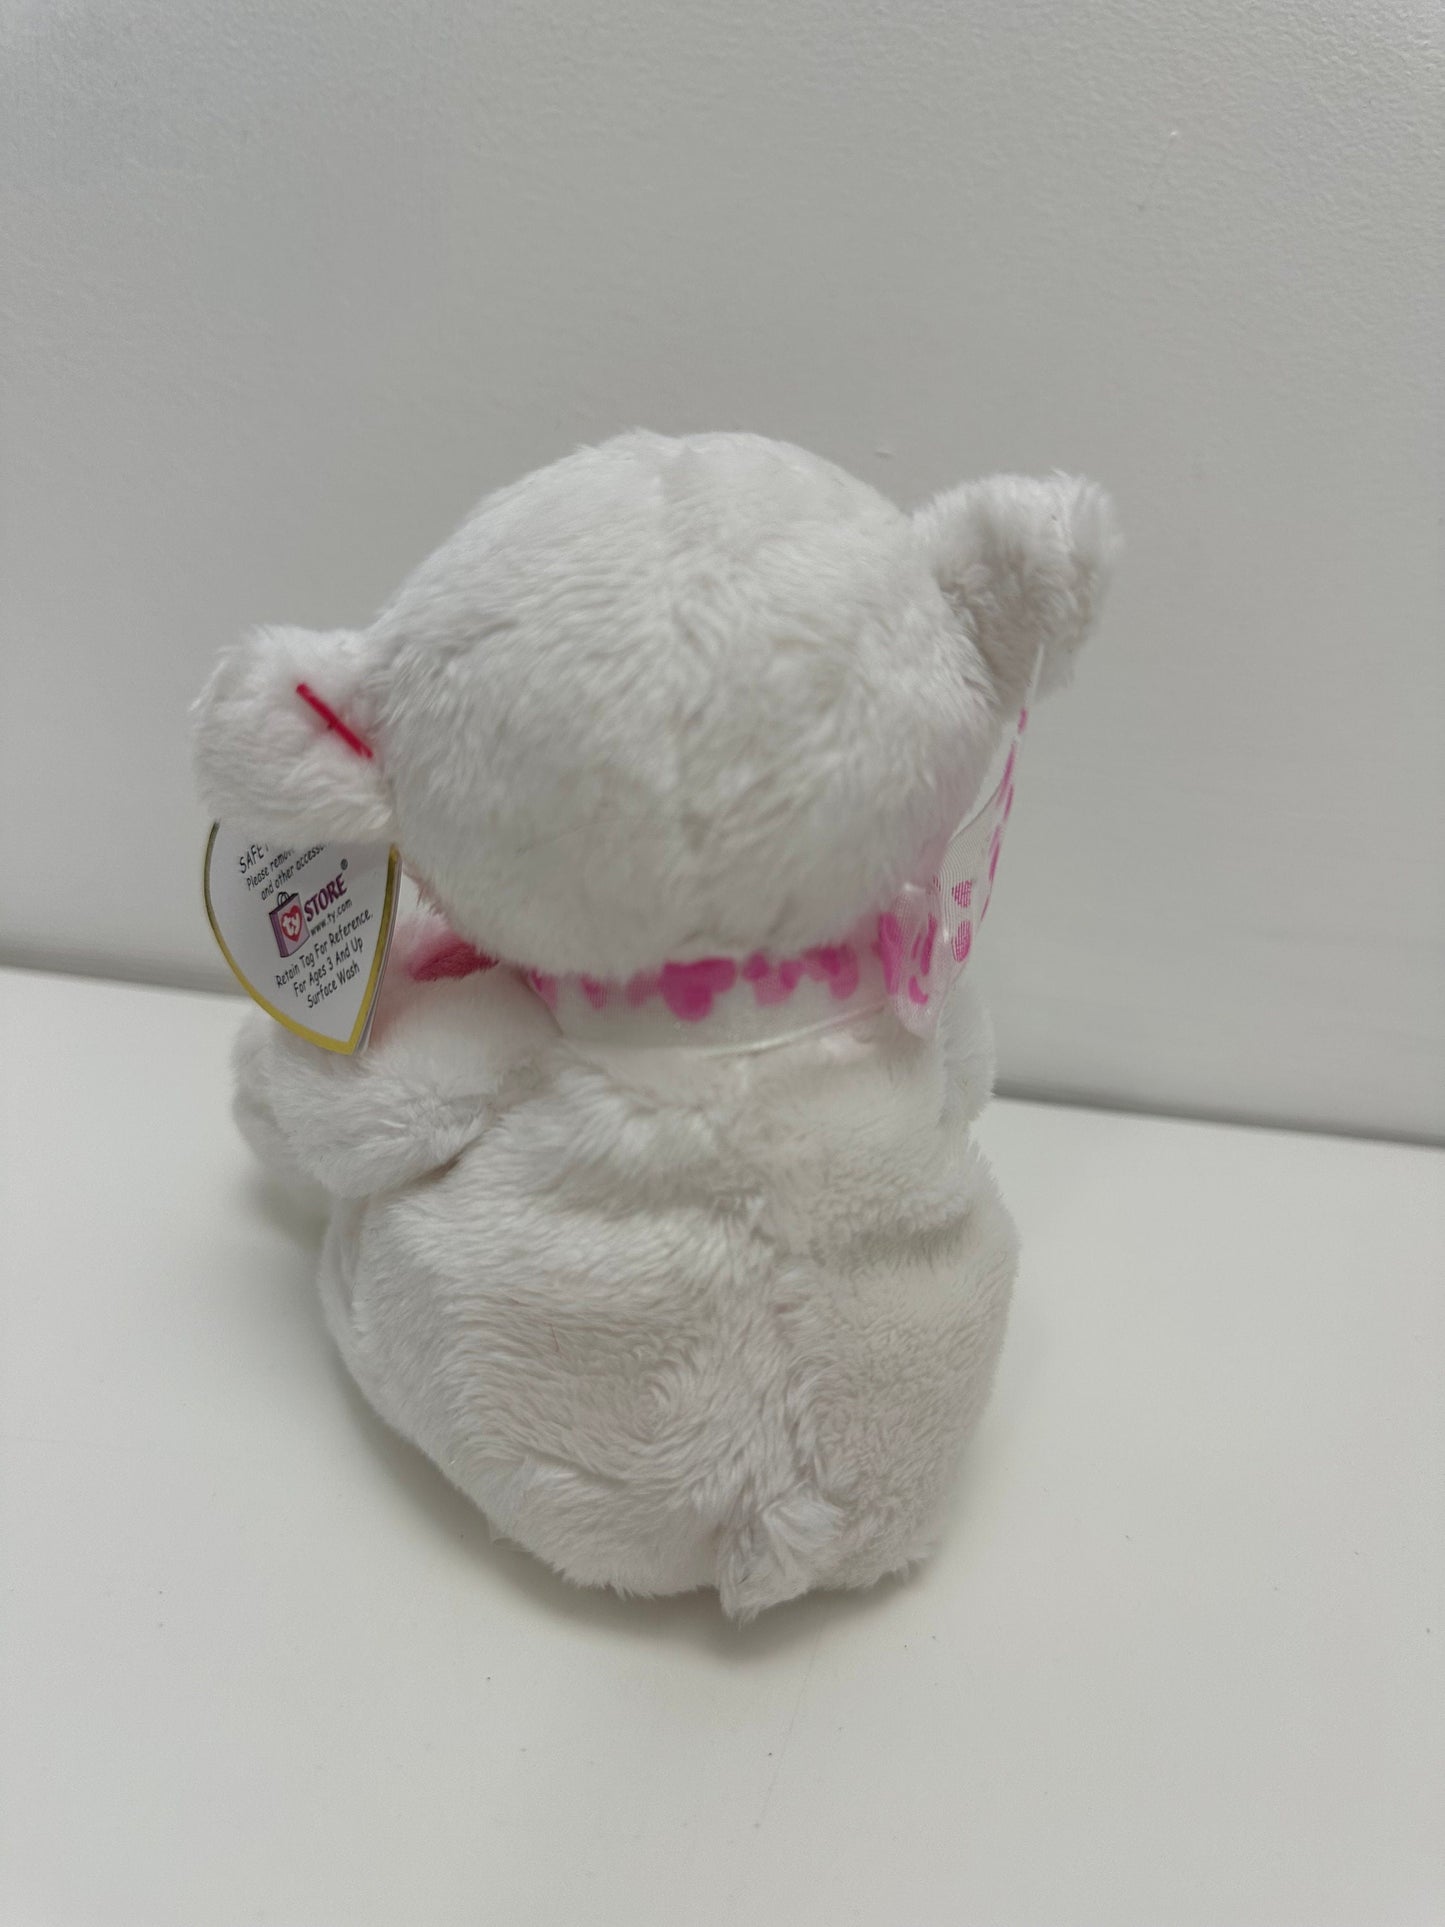 Ty Beanie Baby “Sweetling” the I Love You Mothers Day Bear or Gift for mom! (5 inch)